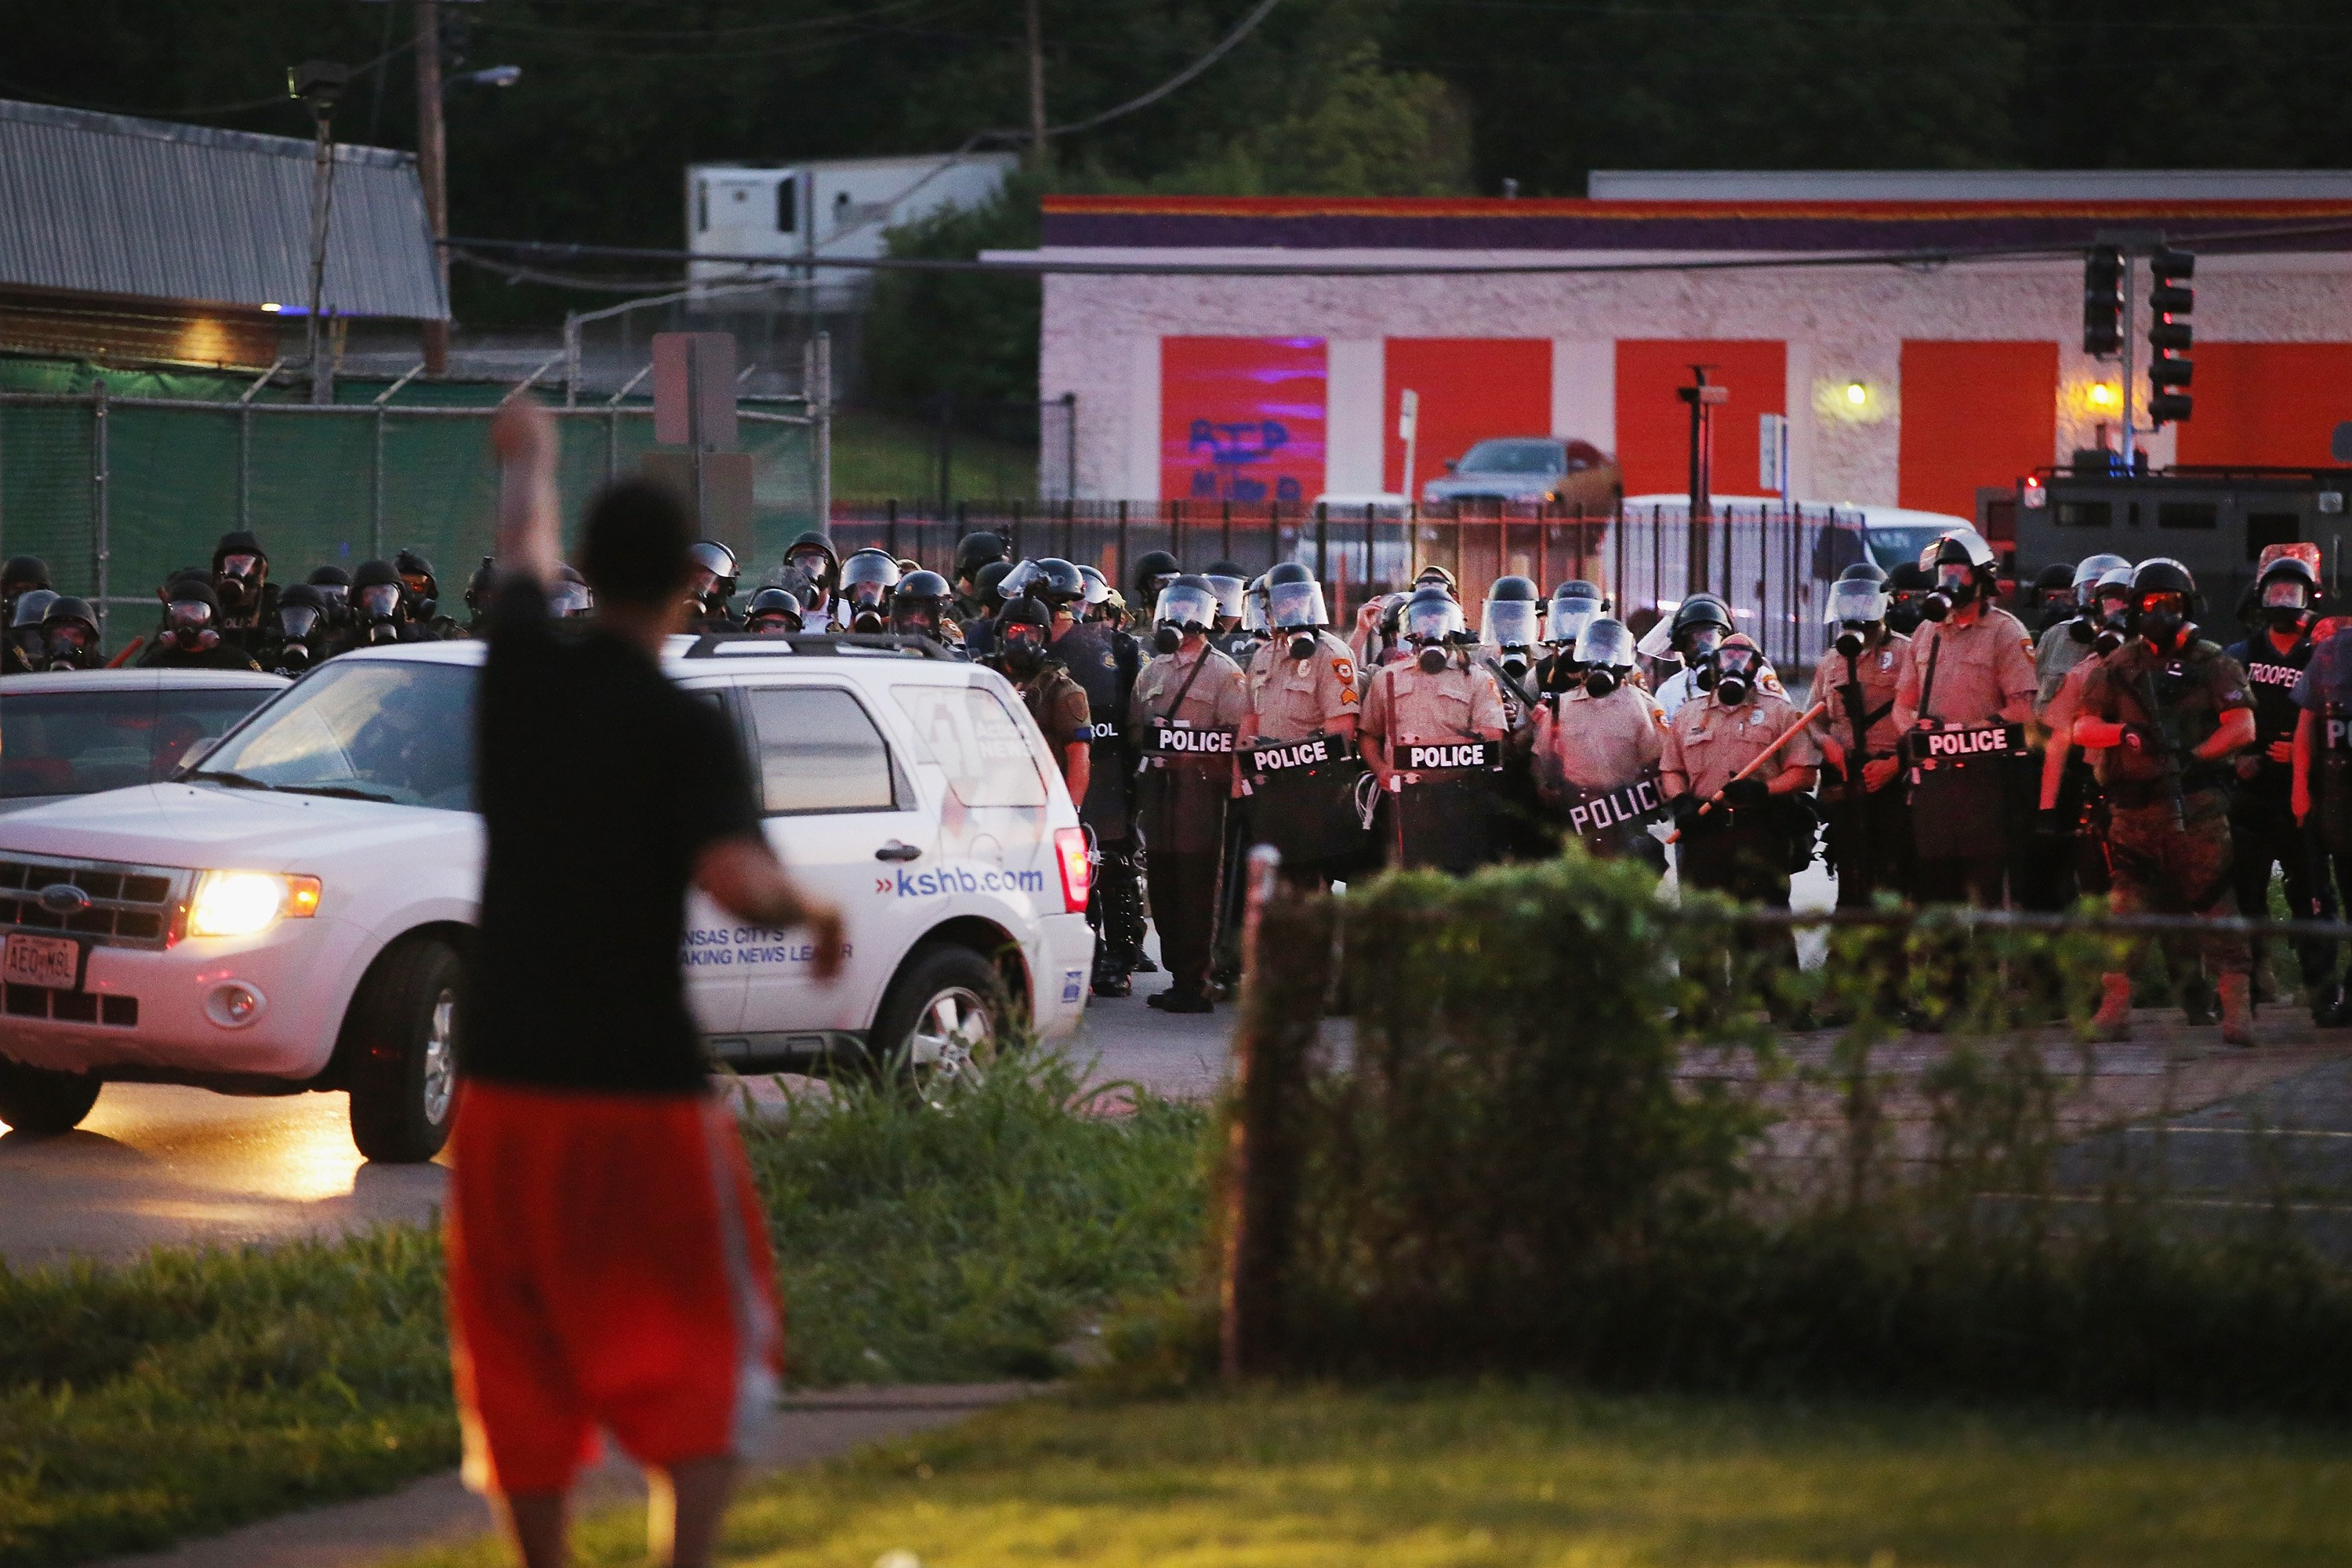 Riot police force protestors from the business district into nearby neighborhoods in Ferguson, Mo. on Aug. 11, 2014. (Scott Olson—Getty Images)